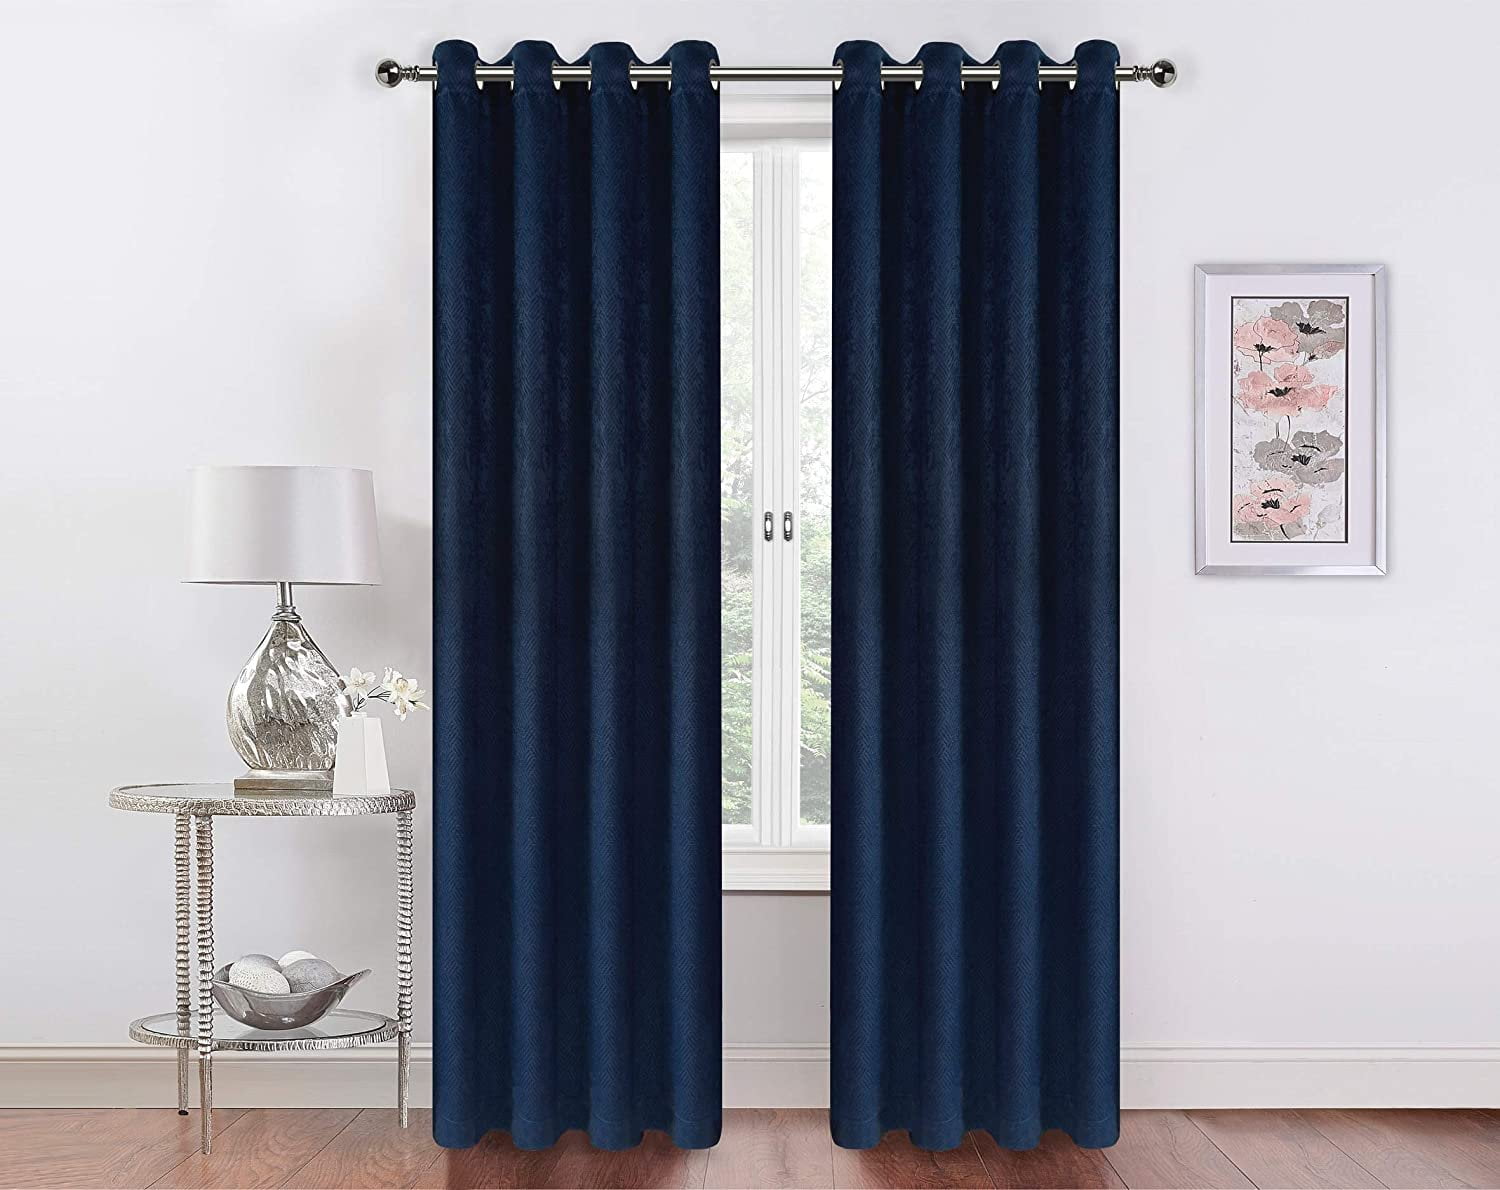 Details about   Spiderman Curtains 1 Panel 3D Print Window Curtain Drapes with Grommets For Boys 